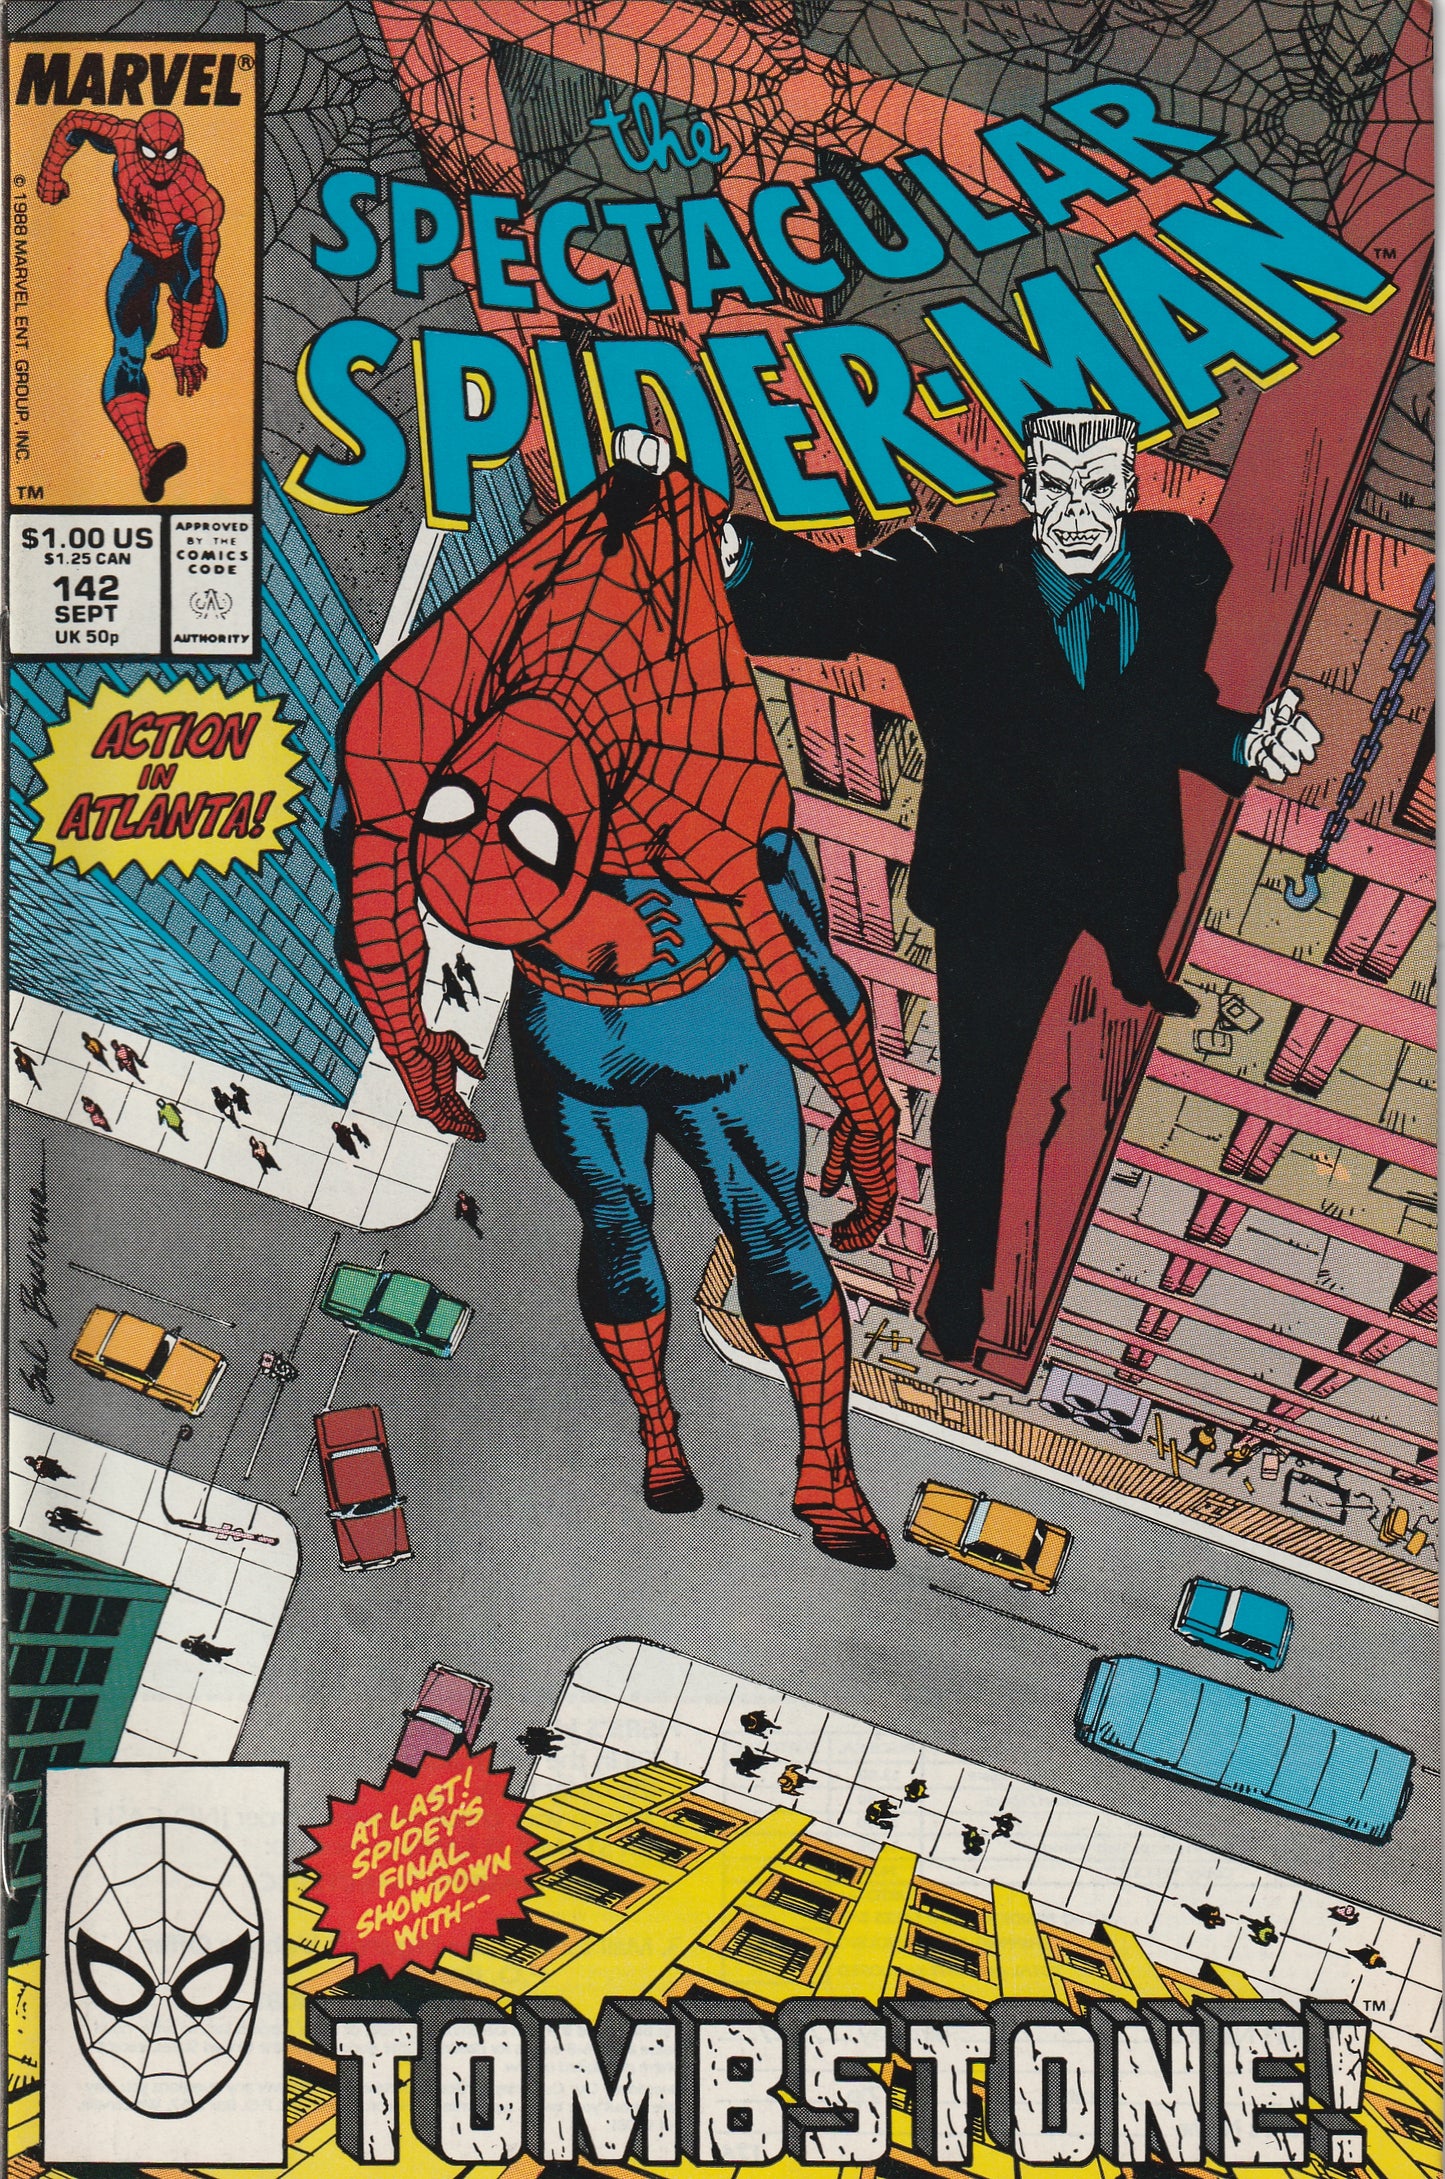 Spectacular Spider-Man #142 (1988) - Punisher appearance